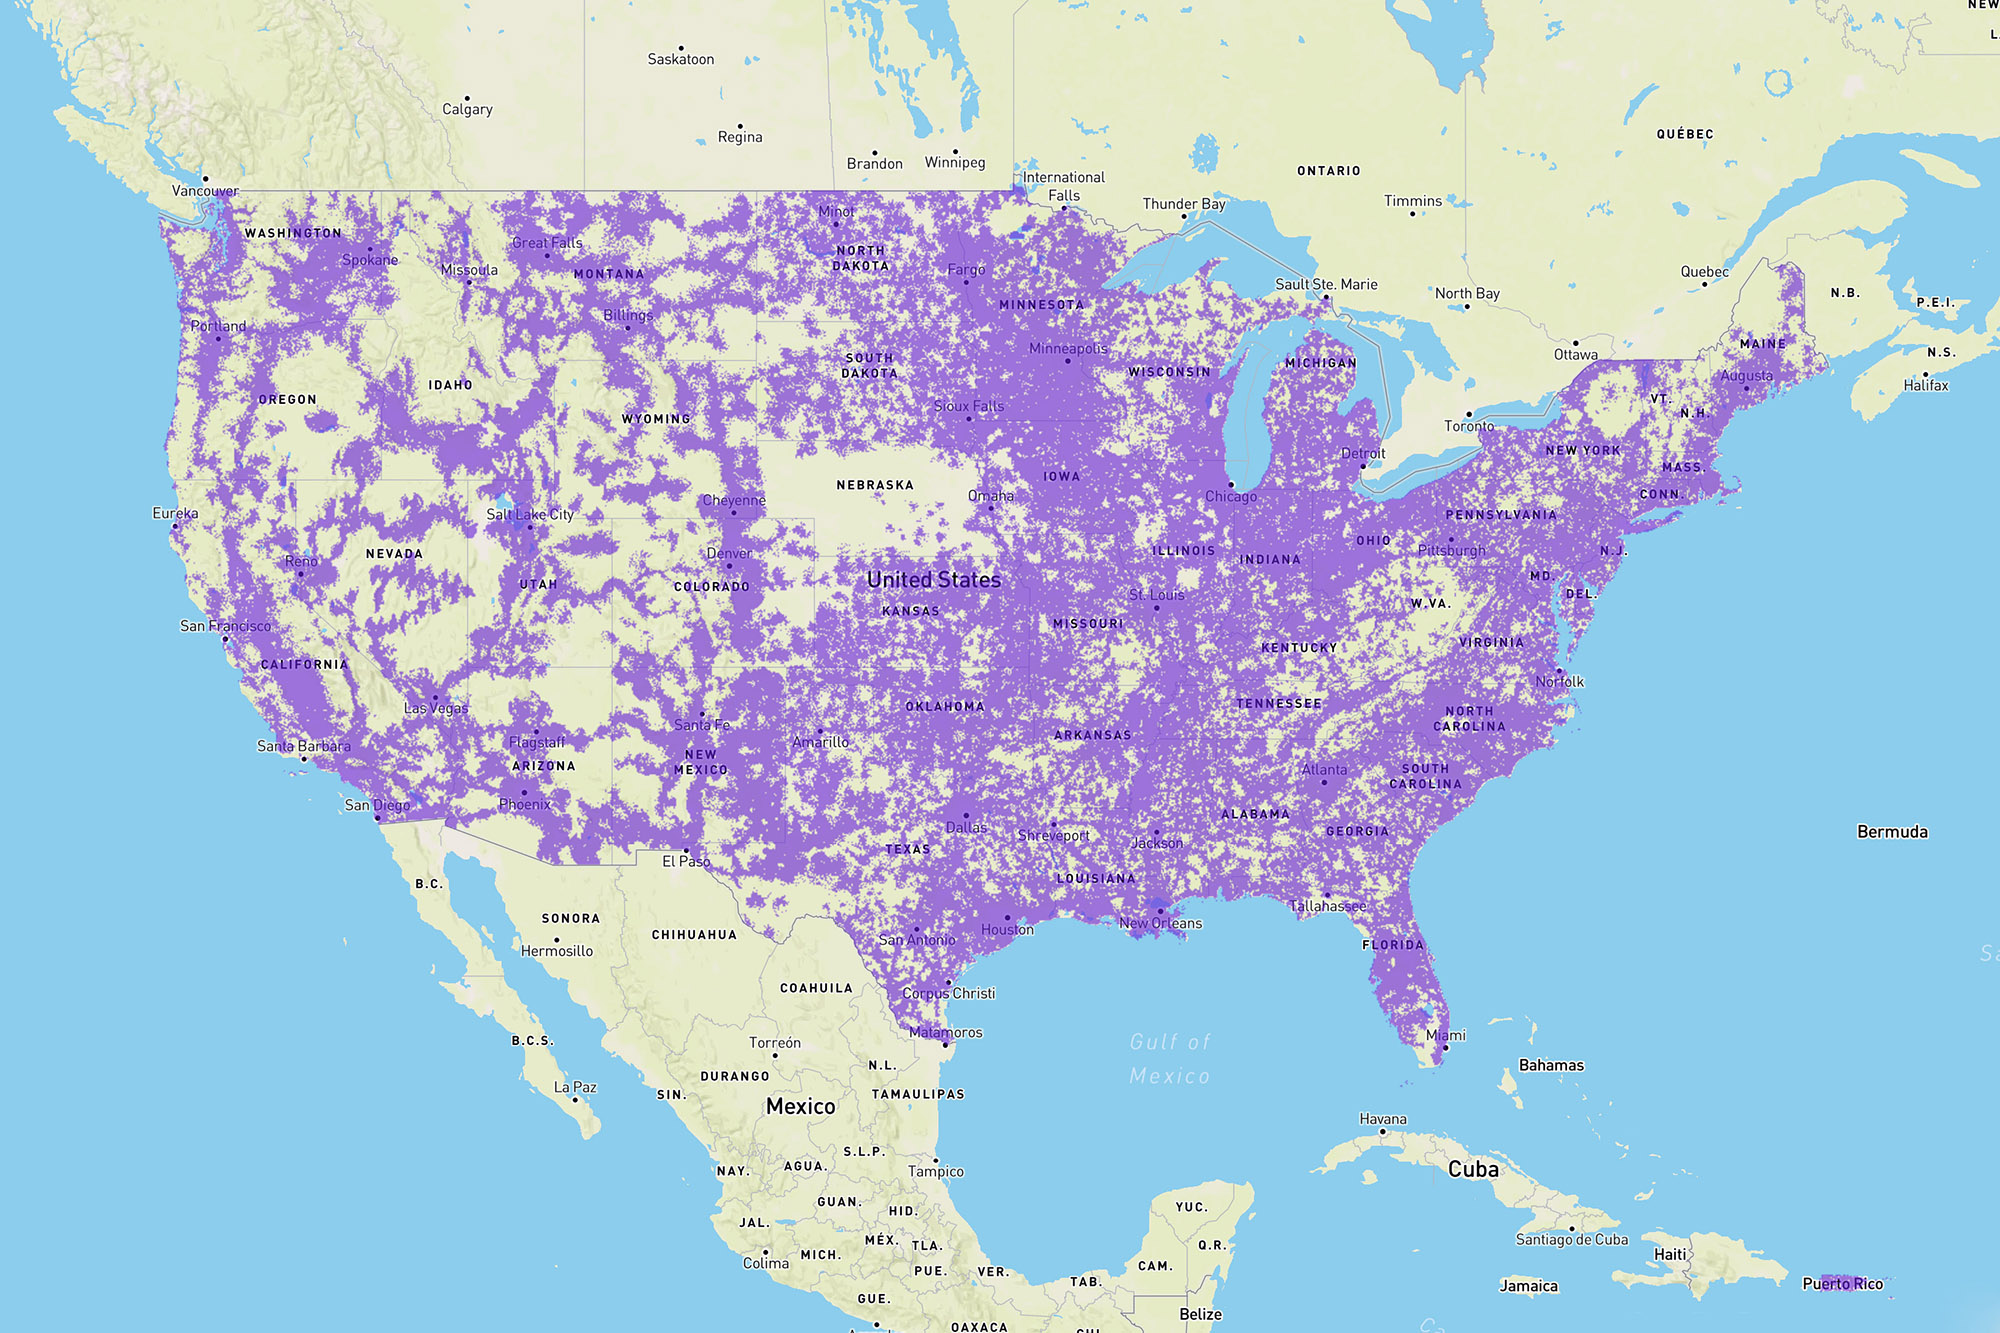 Wireless Coverage on Every Major US Network